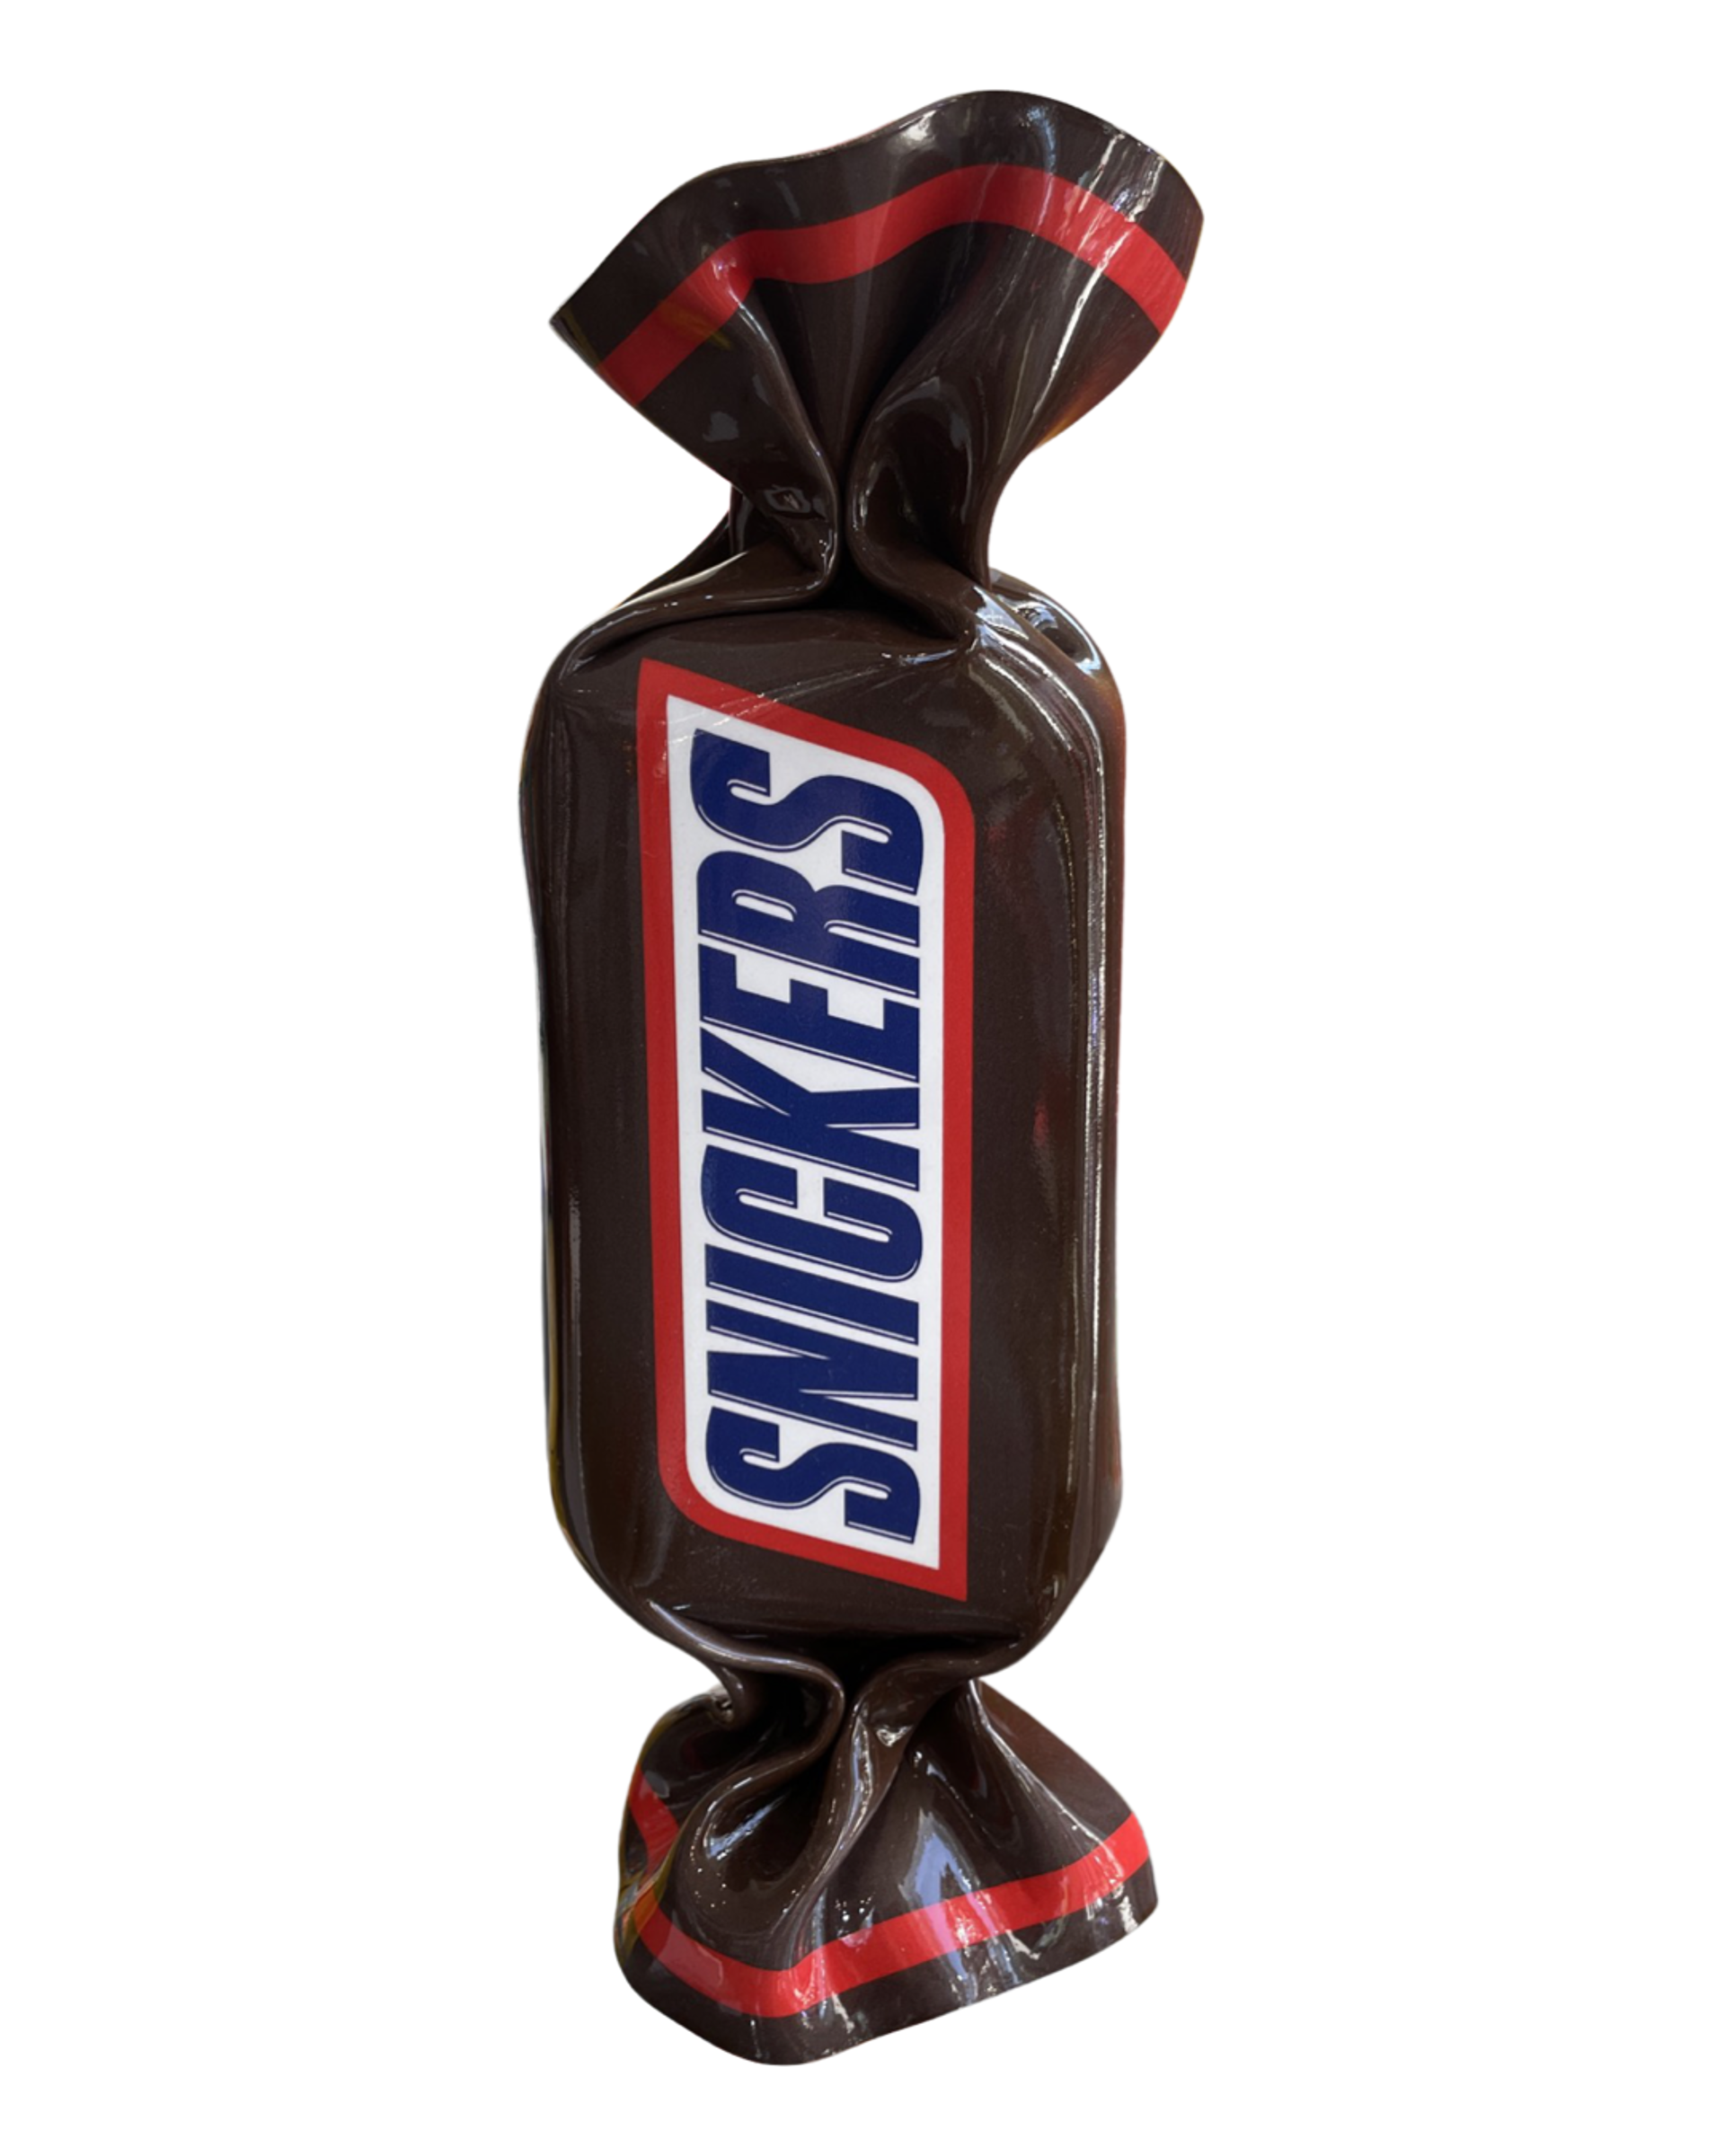 "Snickers" Candy Bar by David Mir